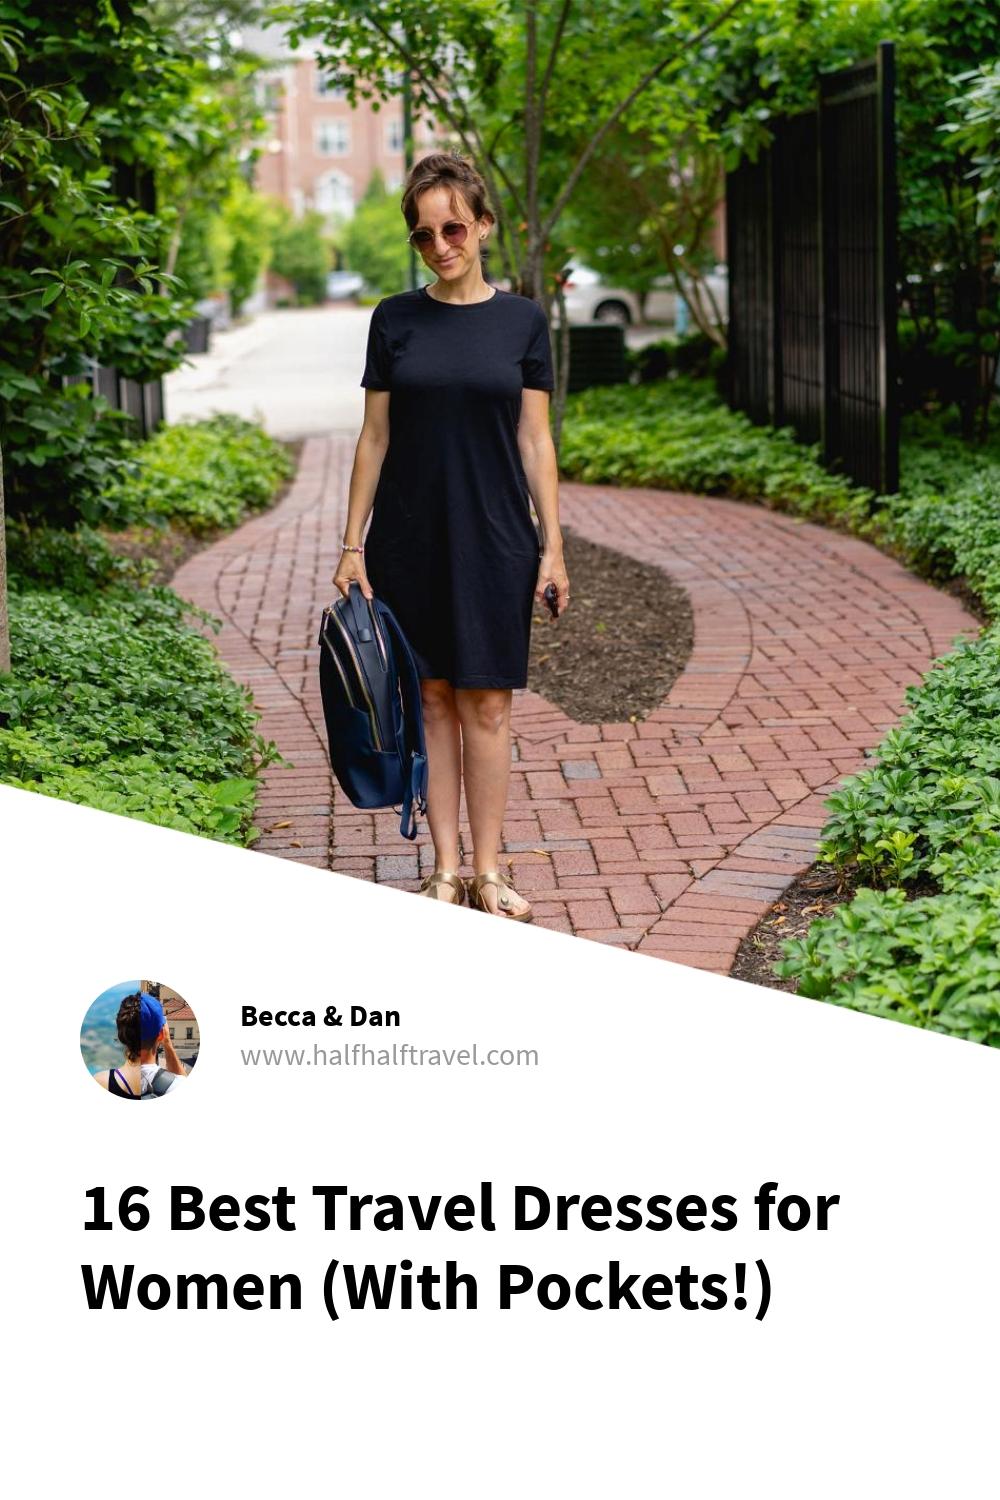 Pinterest image from the '16 Best travel dresses for women (With Pockets!)' article on Half Half Travel